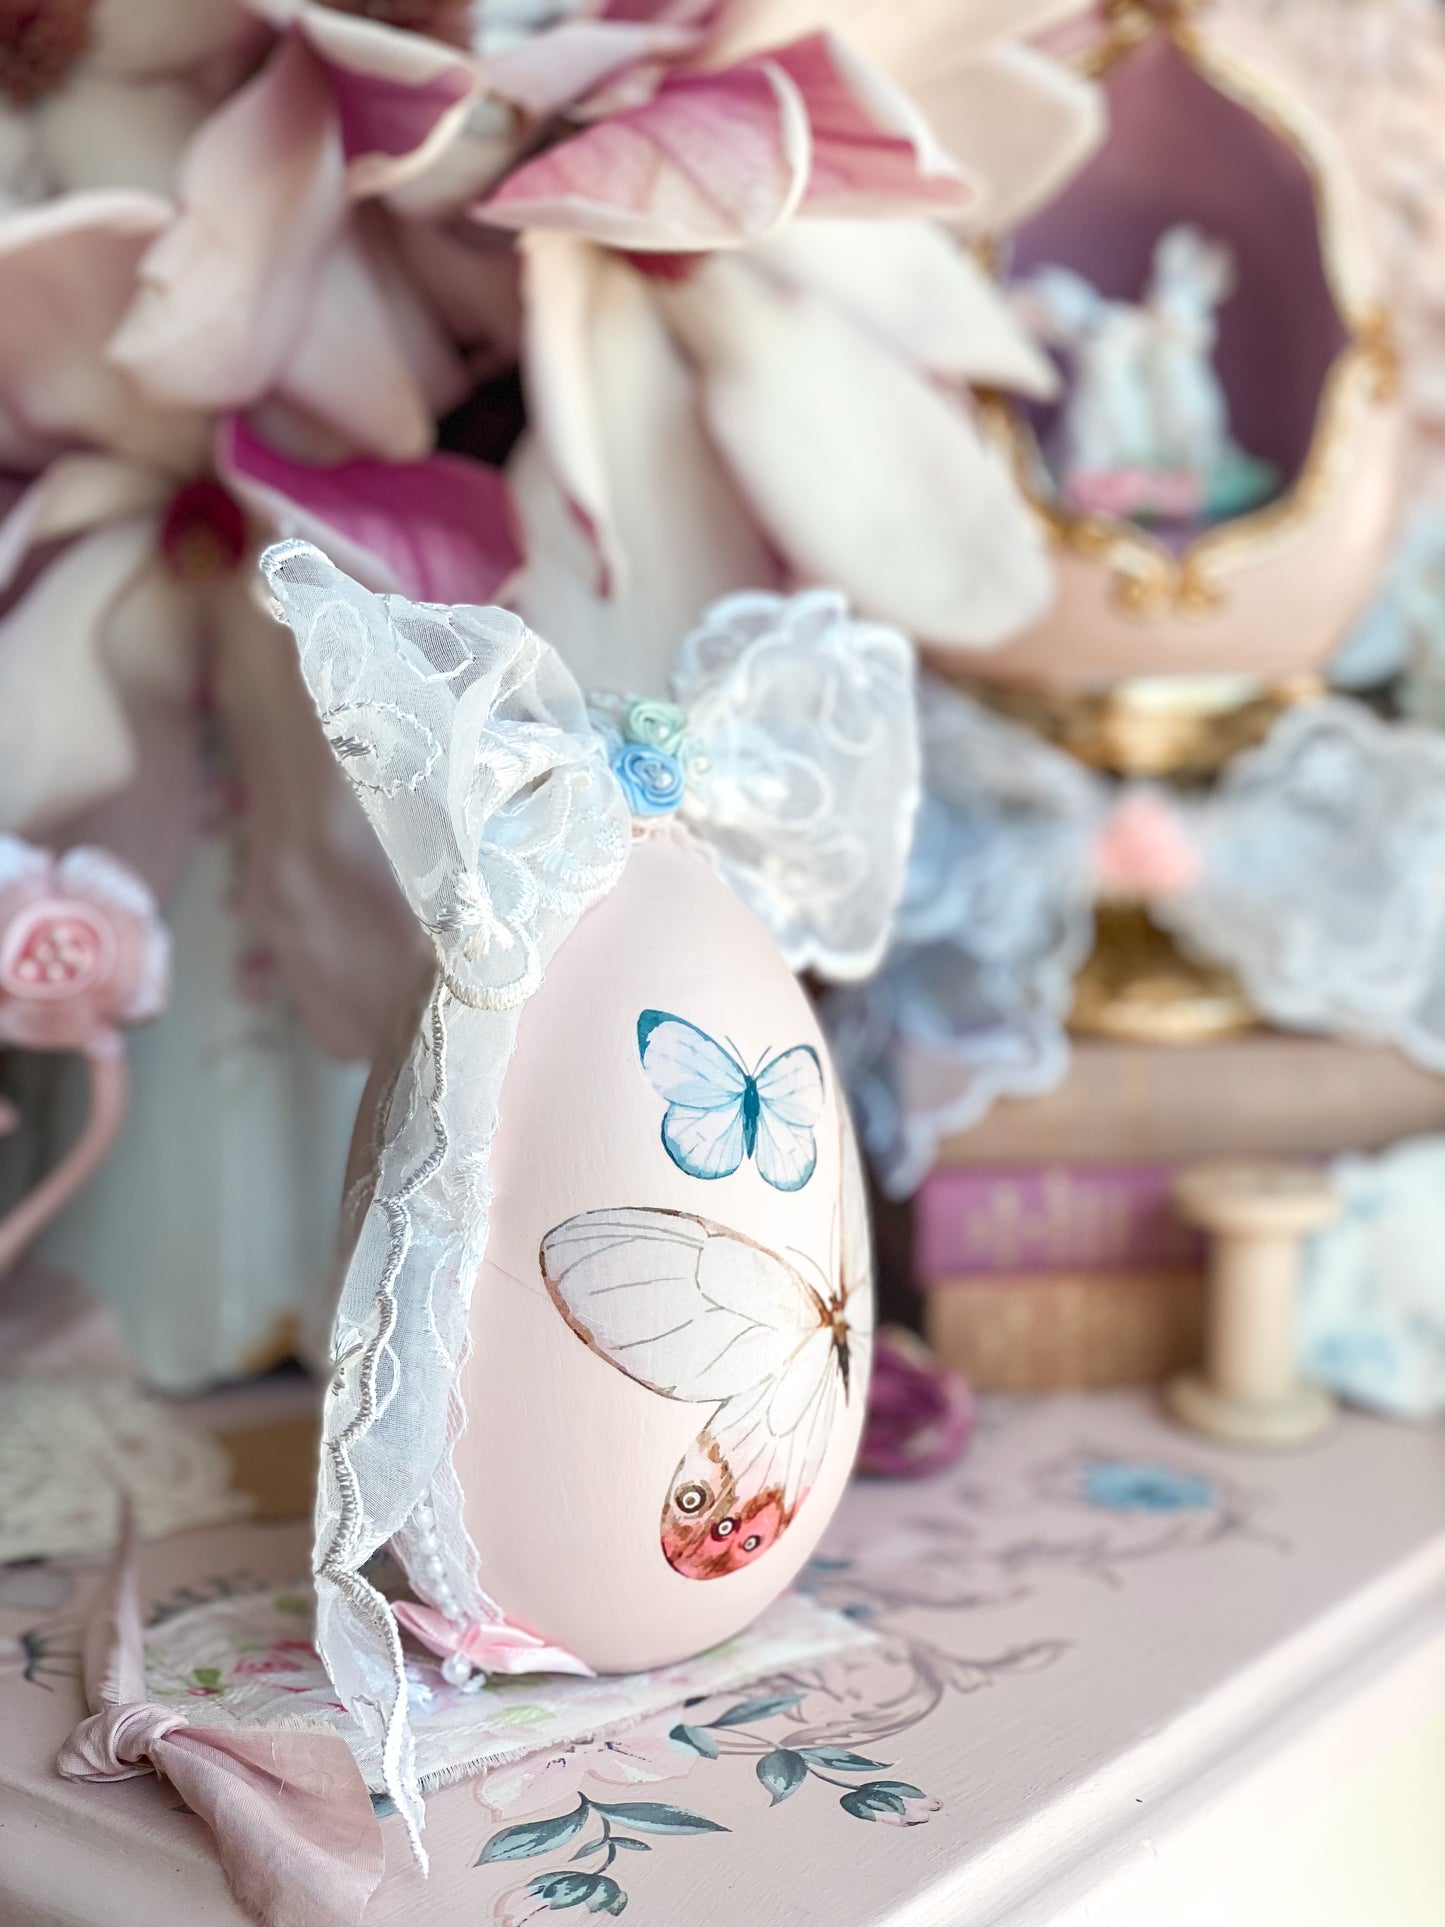 Bespoke Pastel Pink Easter Egg with Blue and White Butterflies and Vintage Chiffon Bow